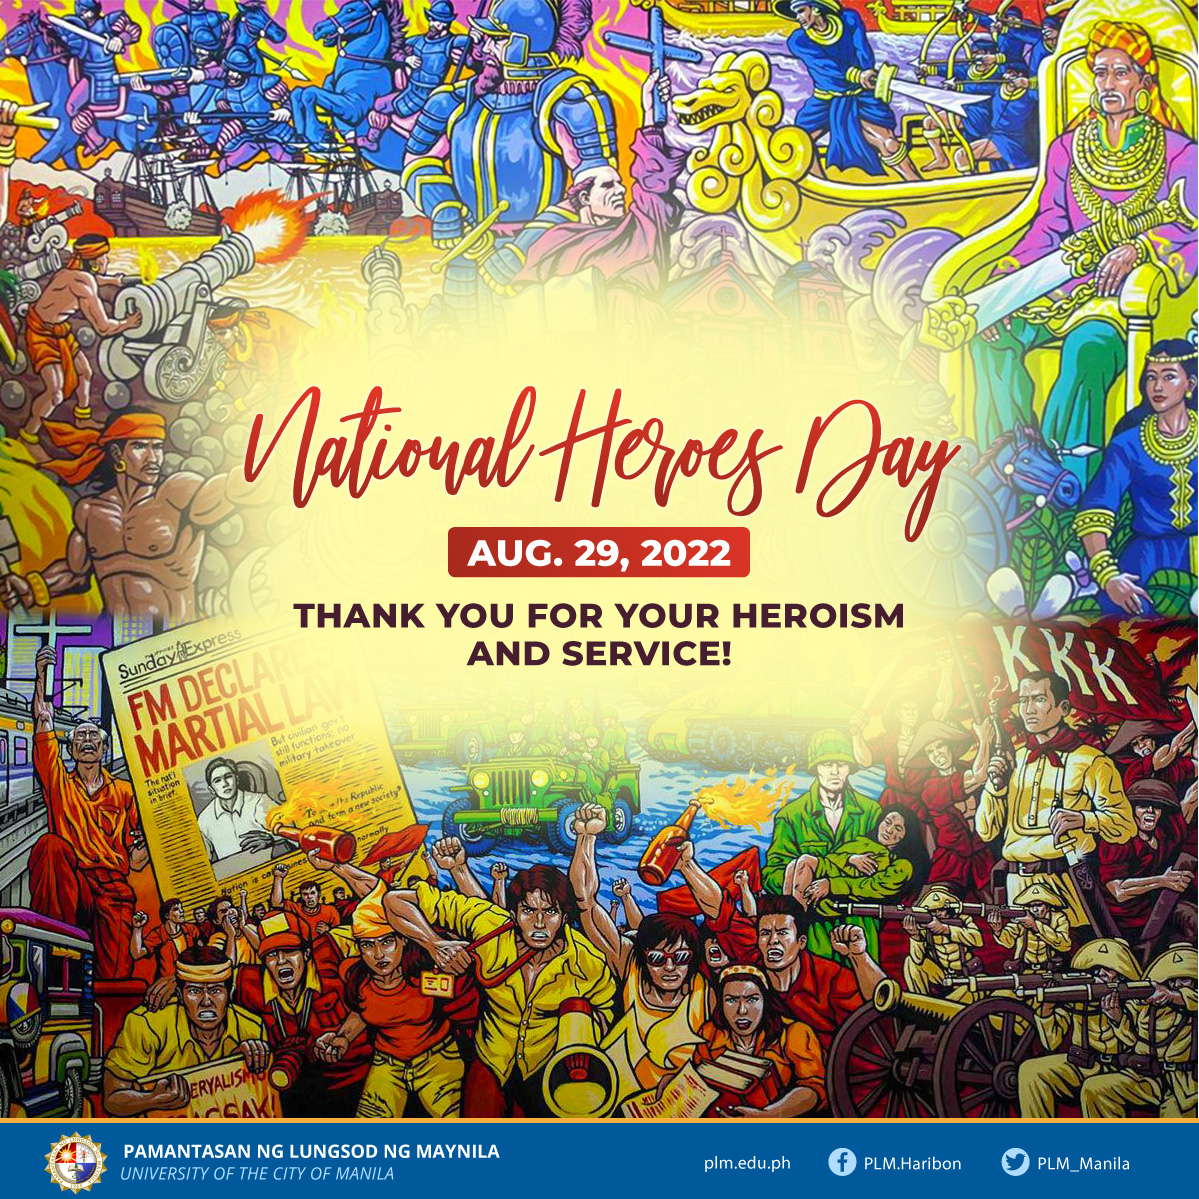 Classes, work suspended on August 29, 2022 (National Heroes Day)